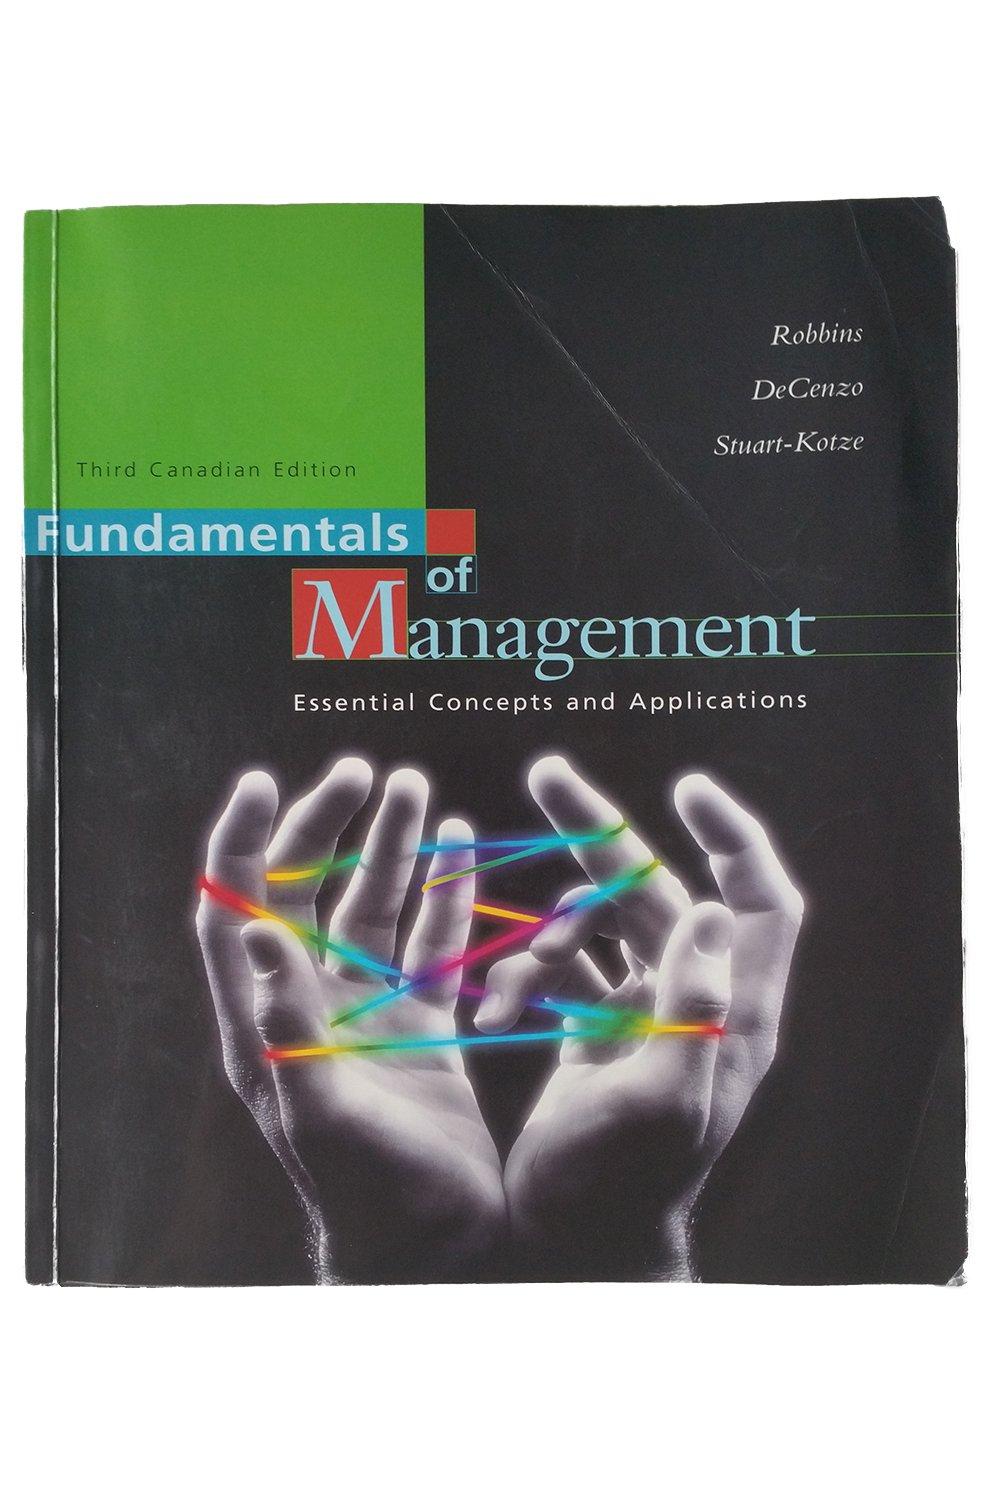 fundamentals of management essential concepts and applications 3rd canadian edition stephen p. robbins, david